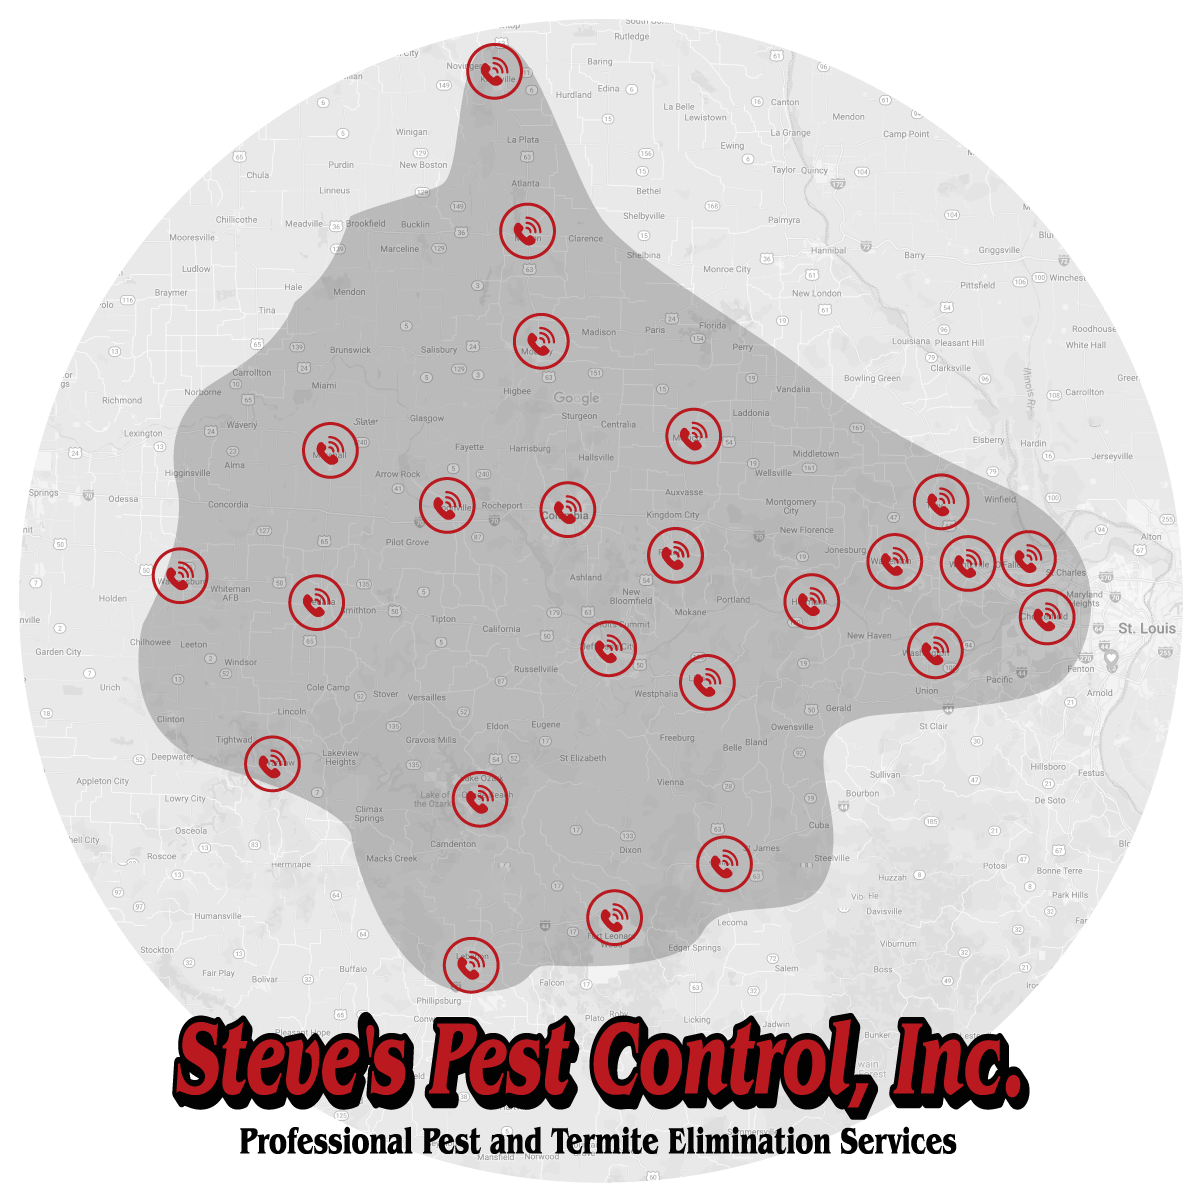 Call Steve's Pest Control to One of 18 Cities in the Mid-Missouri Area